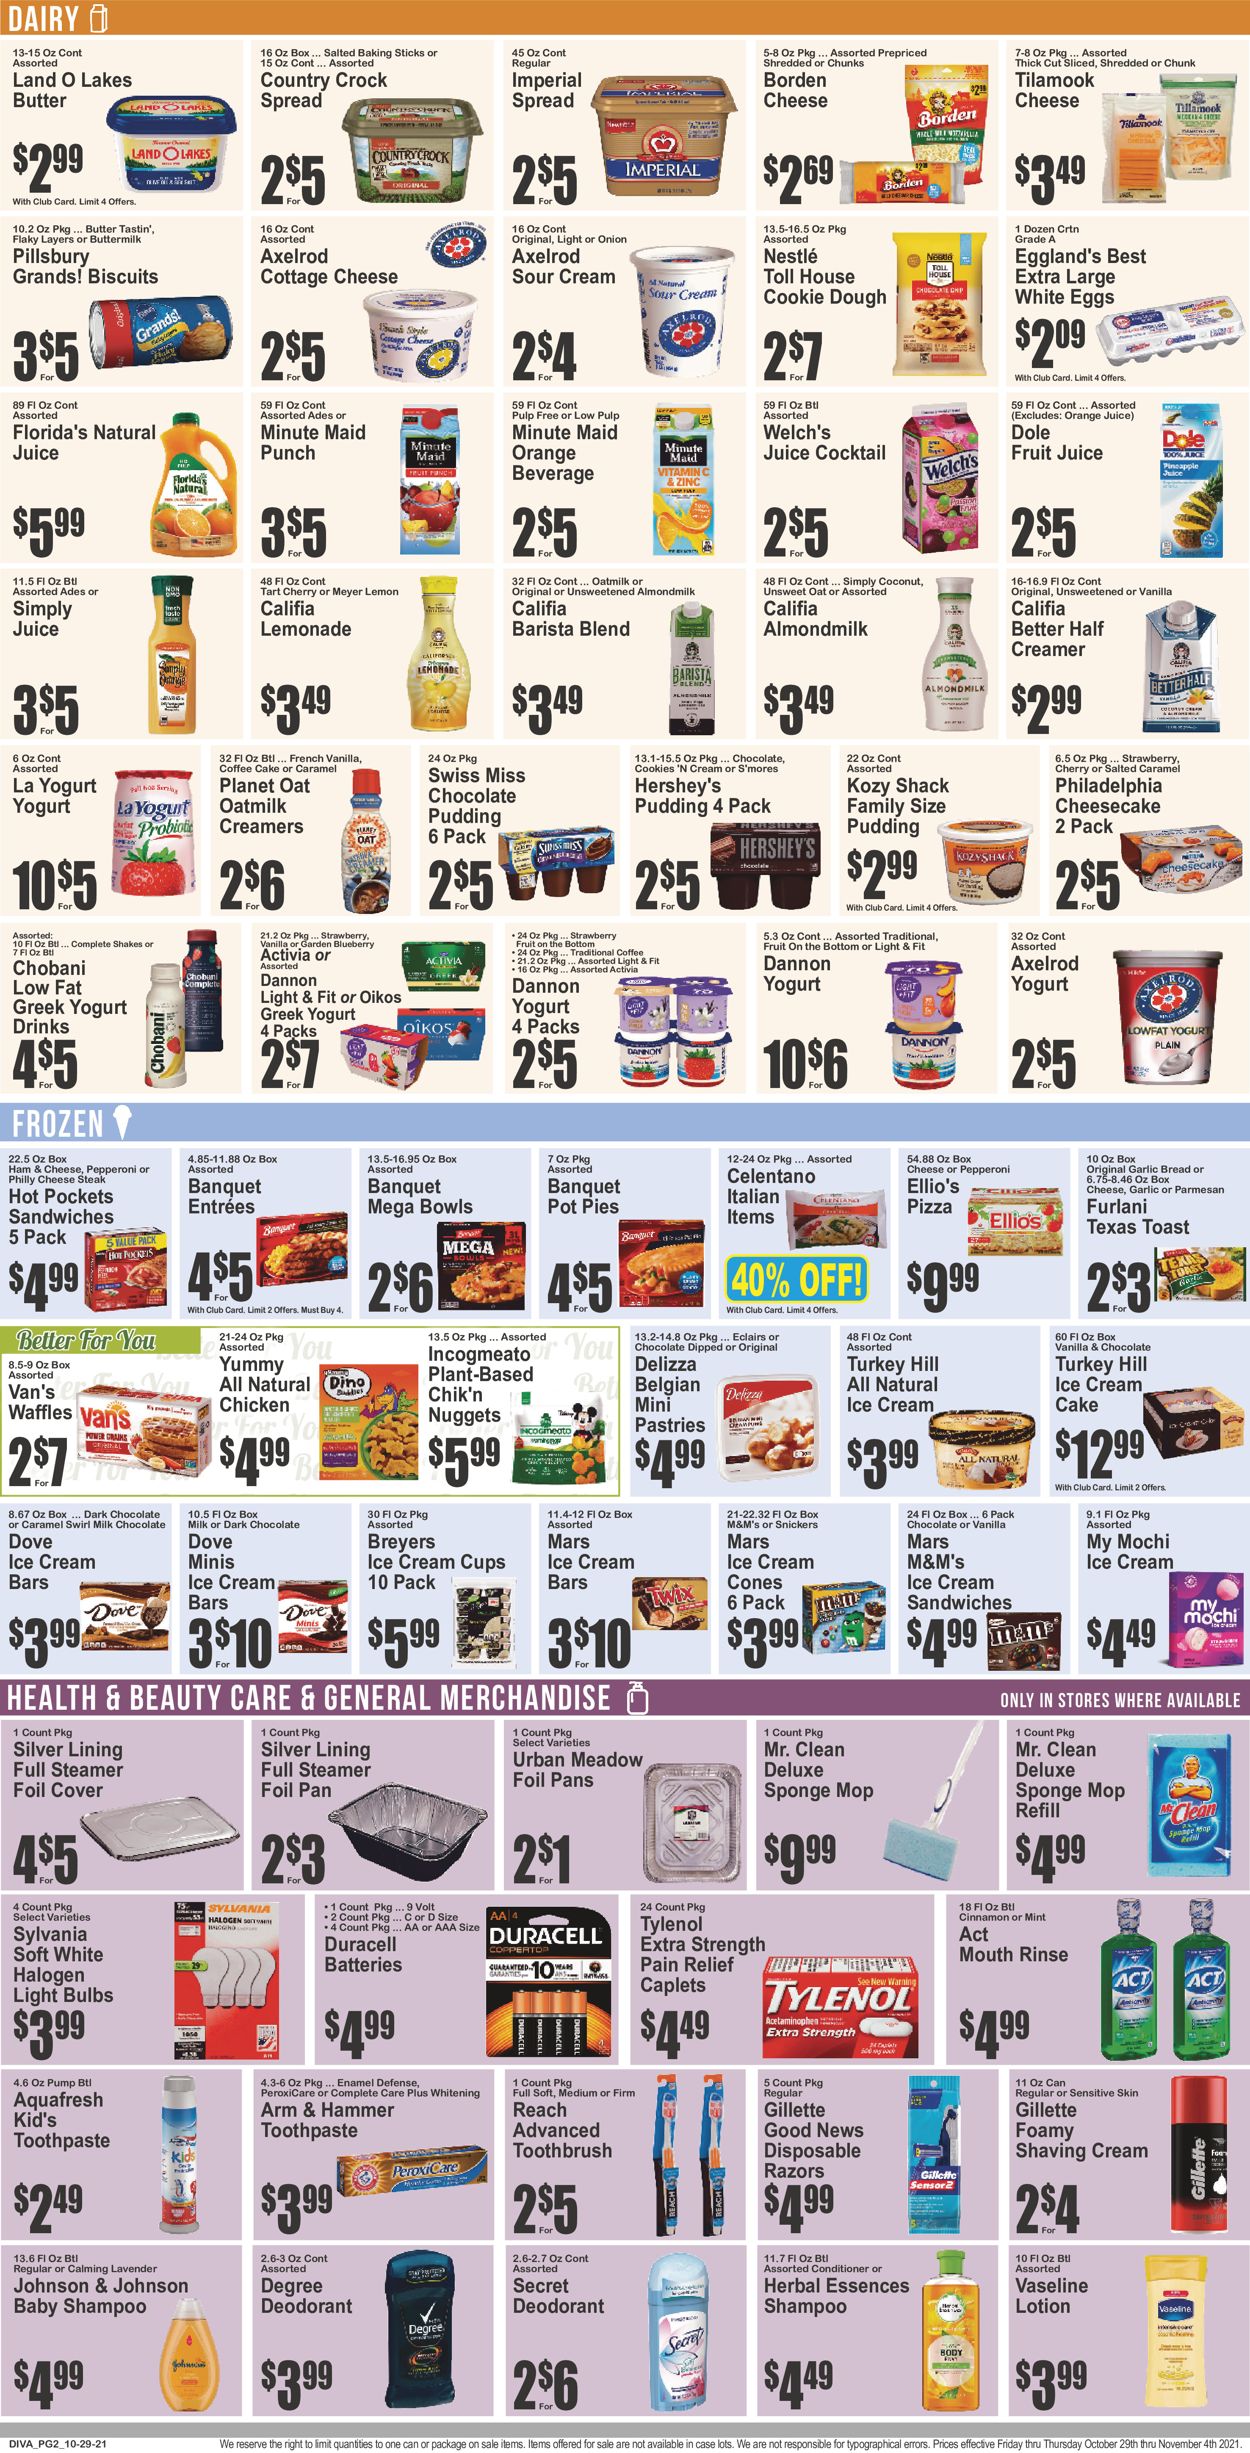 Key Food Ad from 10/29/2021